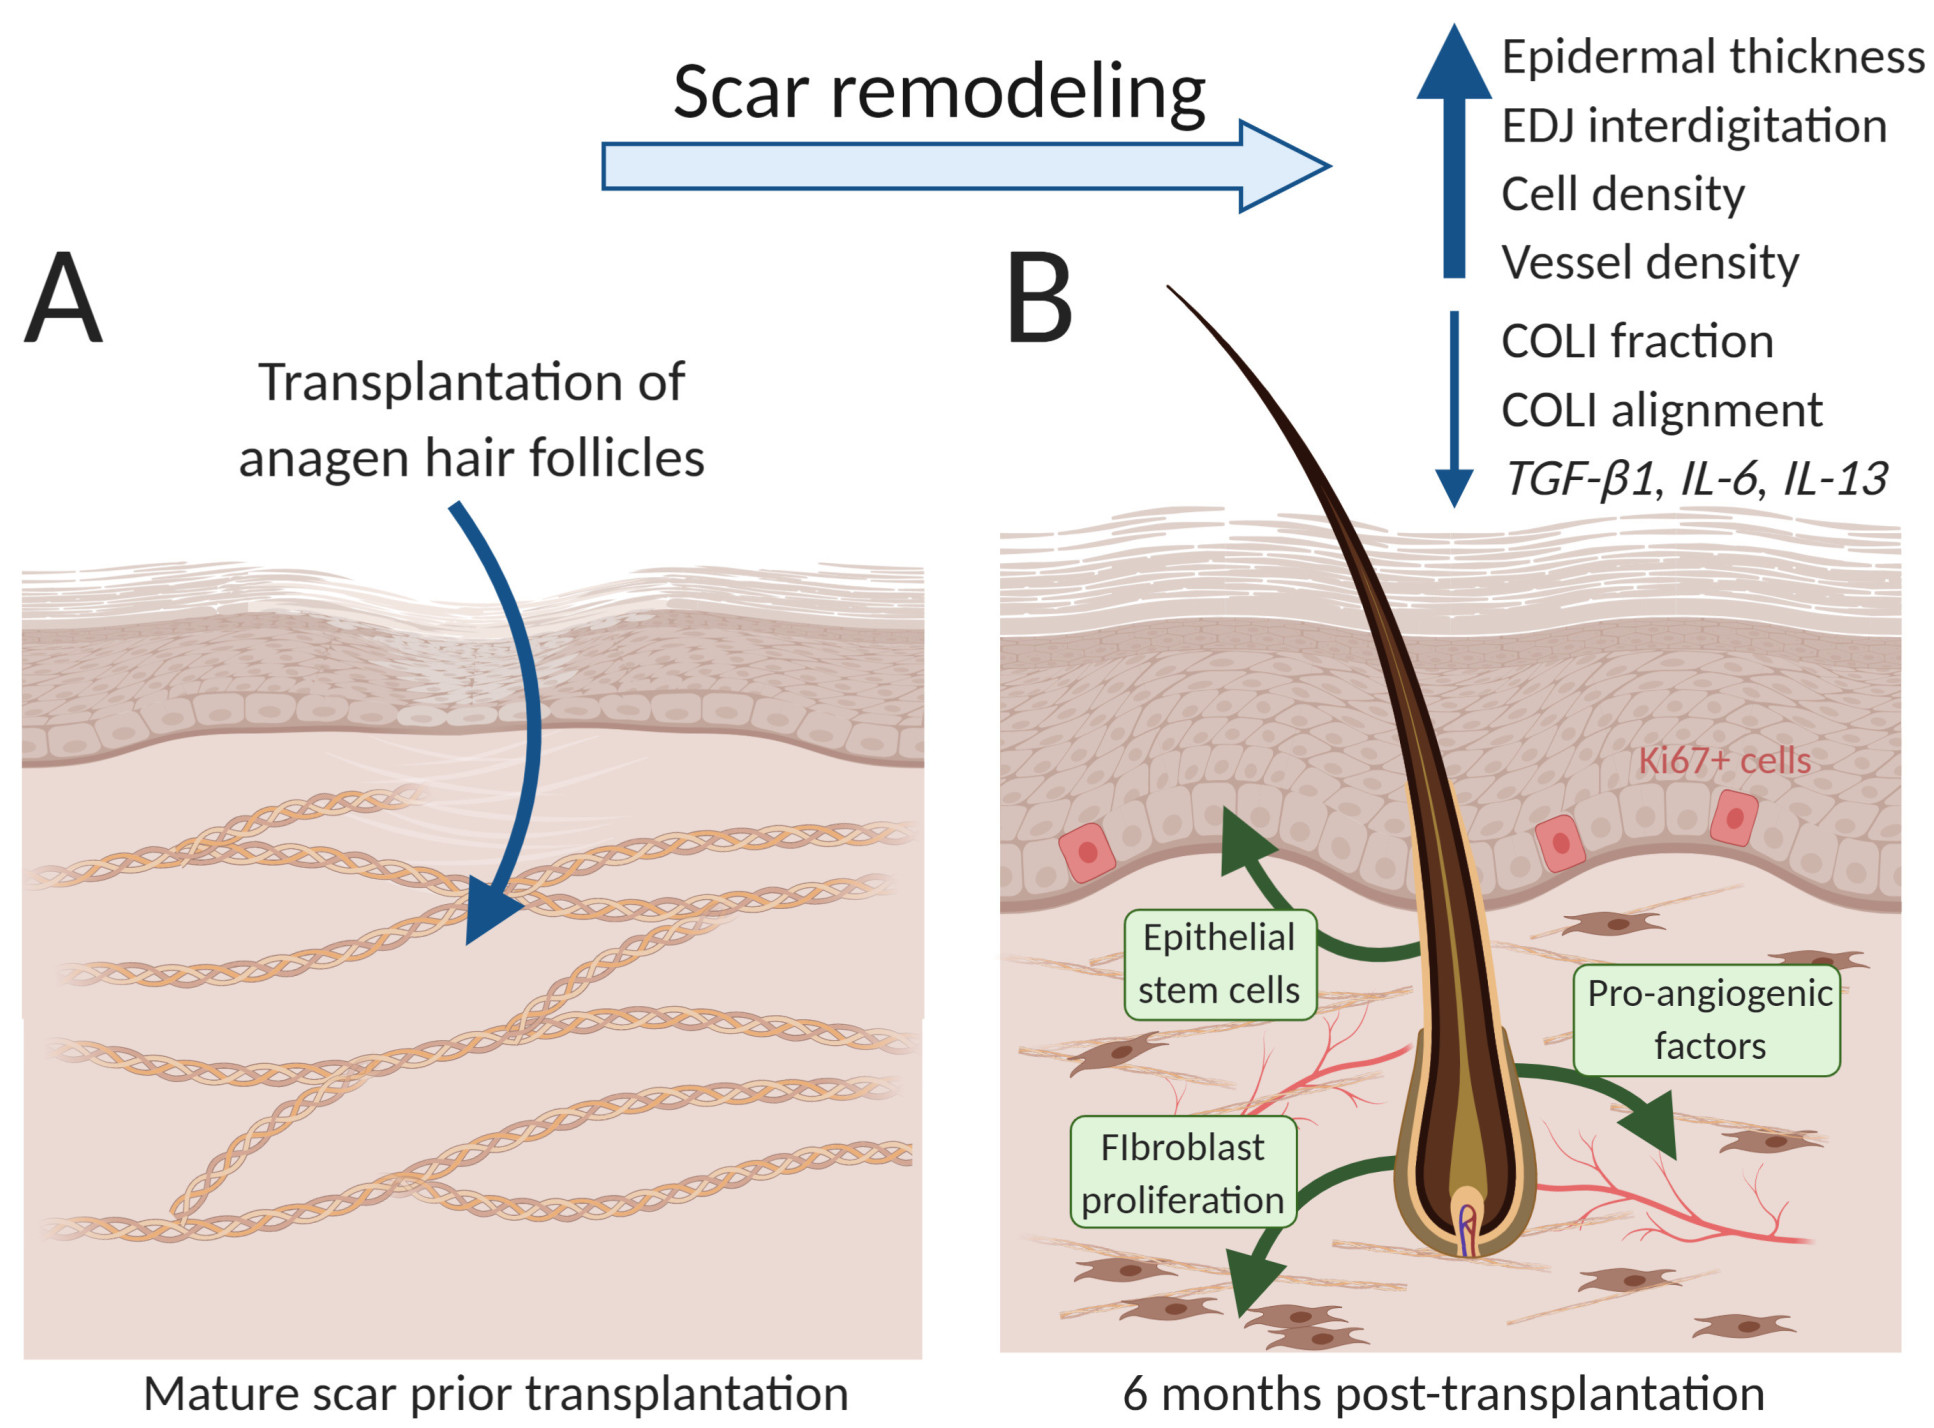 Schematic of results showing how the transplants promoted scar rejuvenation. Before and after diagrams displaying new cells and blood vessels, collagen remodelled into healthy patterns, and upregulated genes found in healthy unscarred skin.